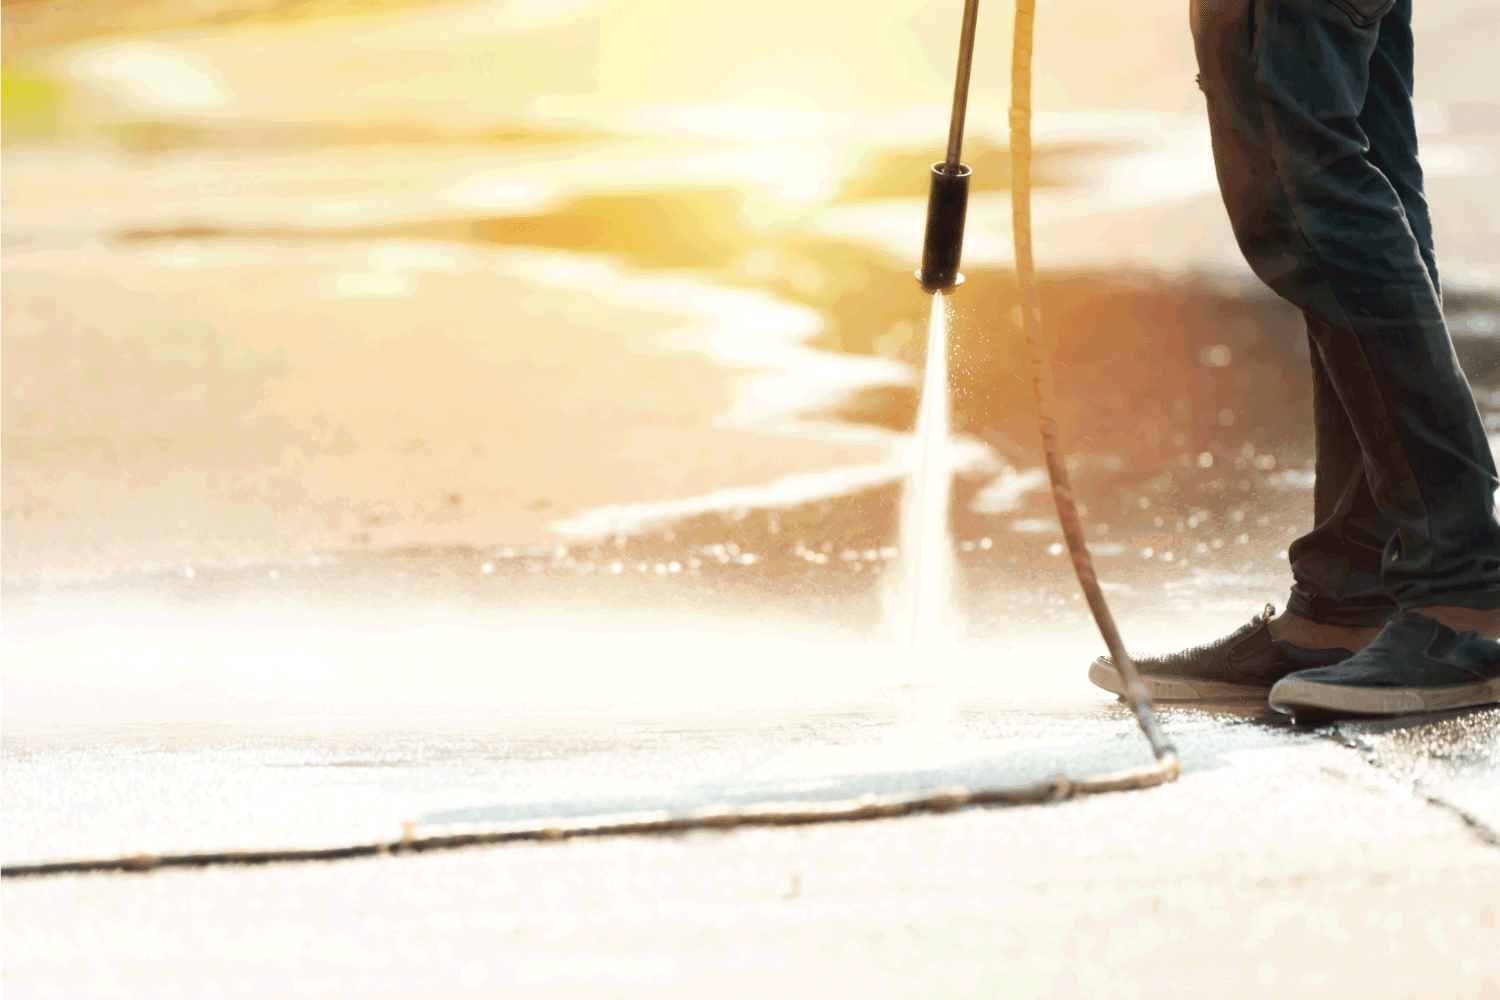 Worker cleaning driveway with gasoline high pressure washer splashing the dirt. Professional cleaning services.